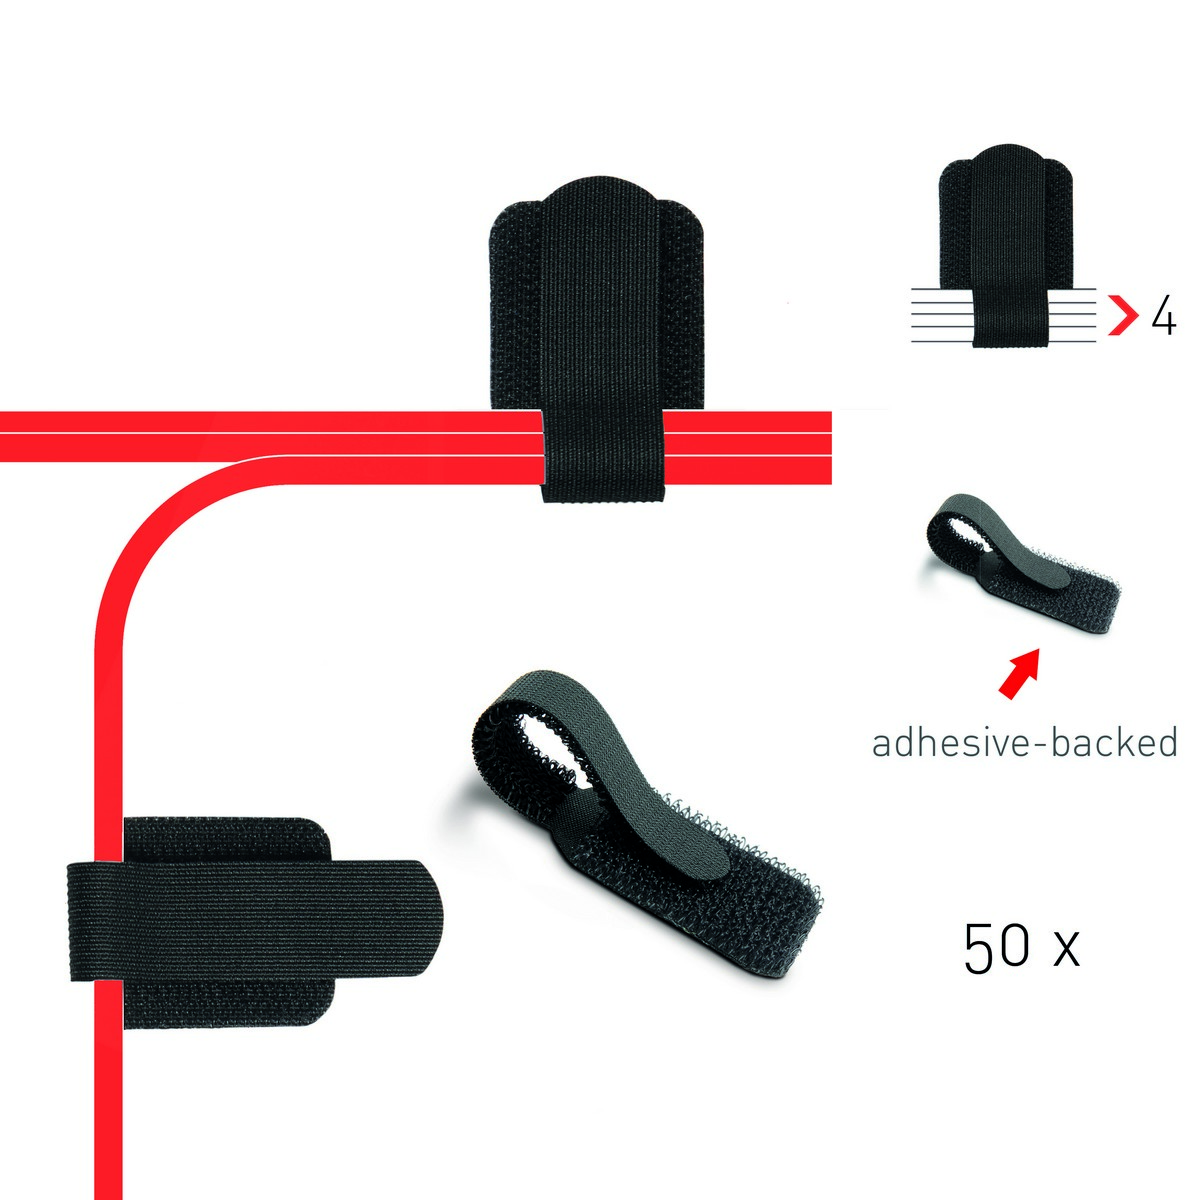 LTC Pro Wall, Cable Management Clips Self-Adhesive (black)